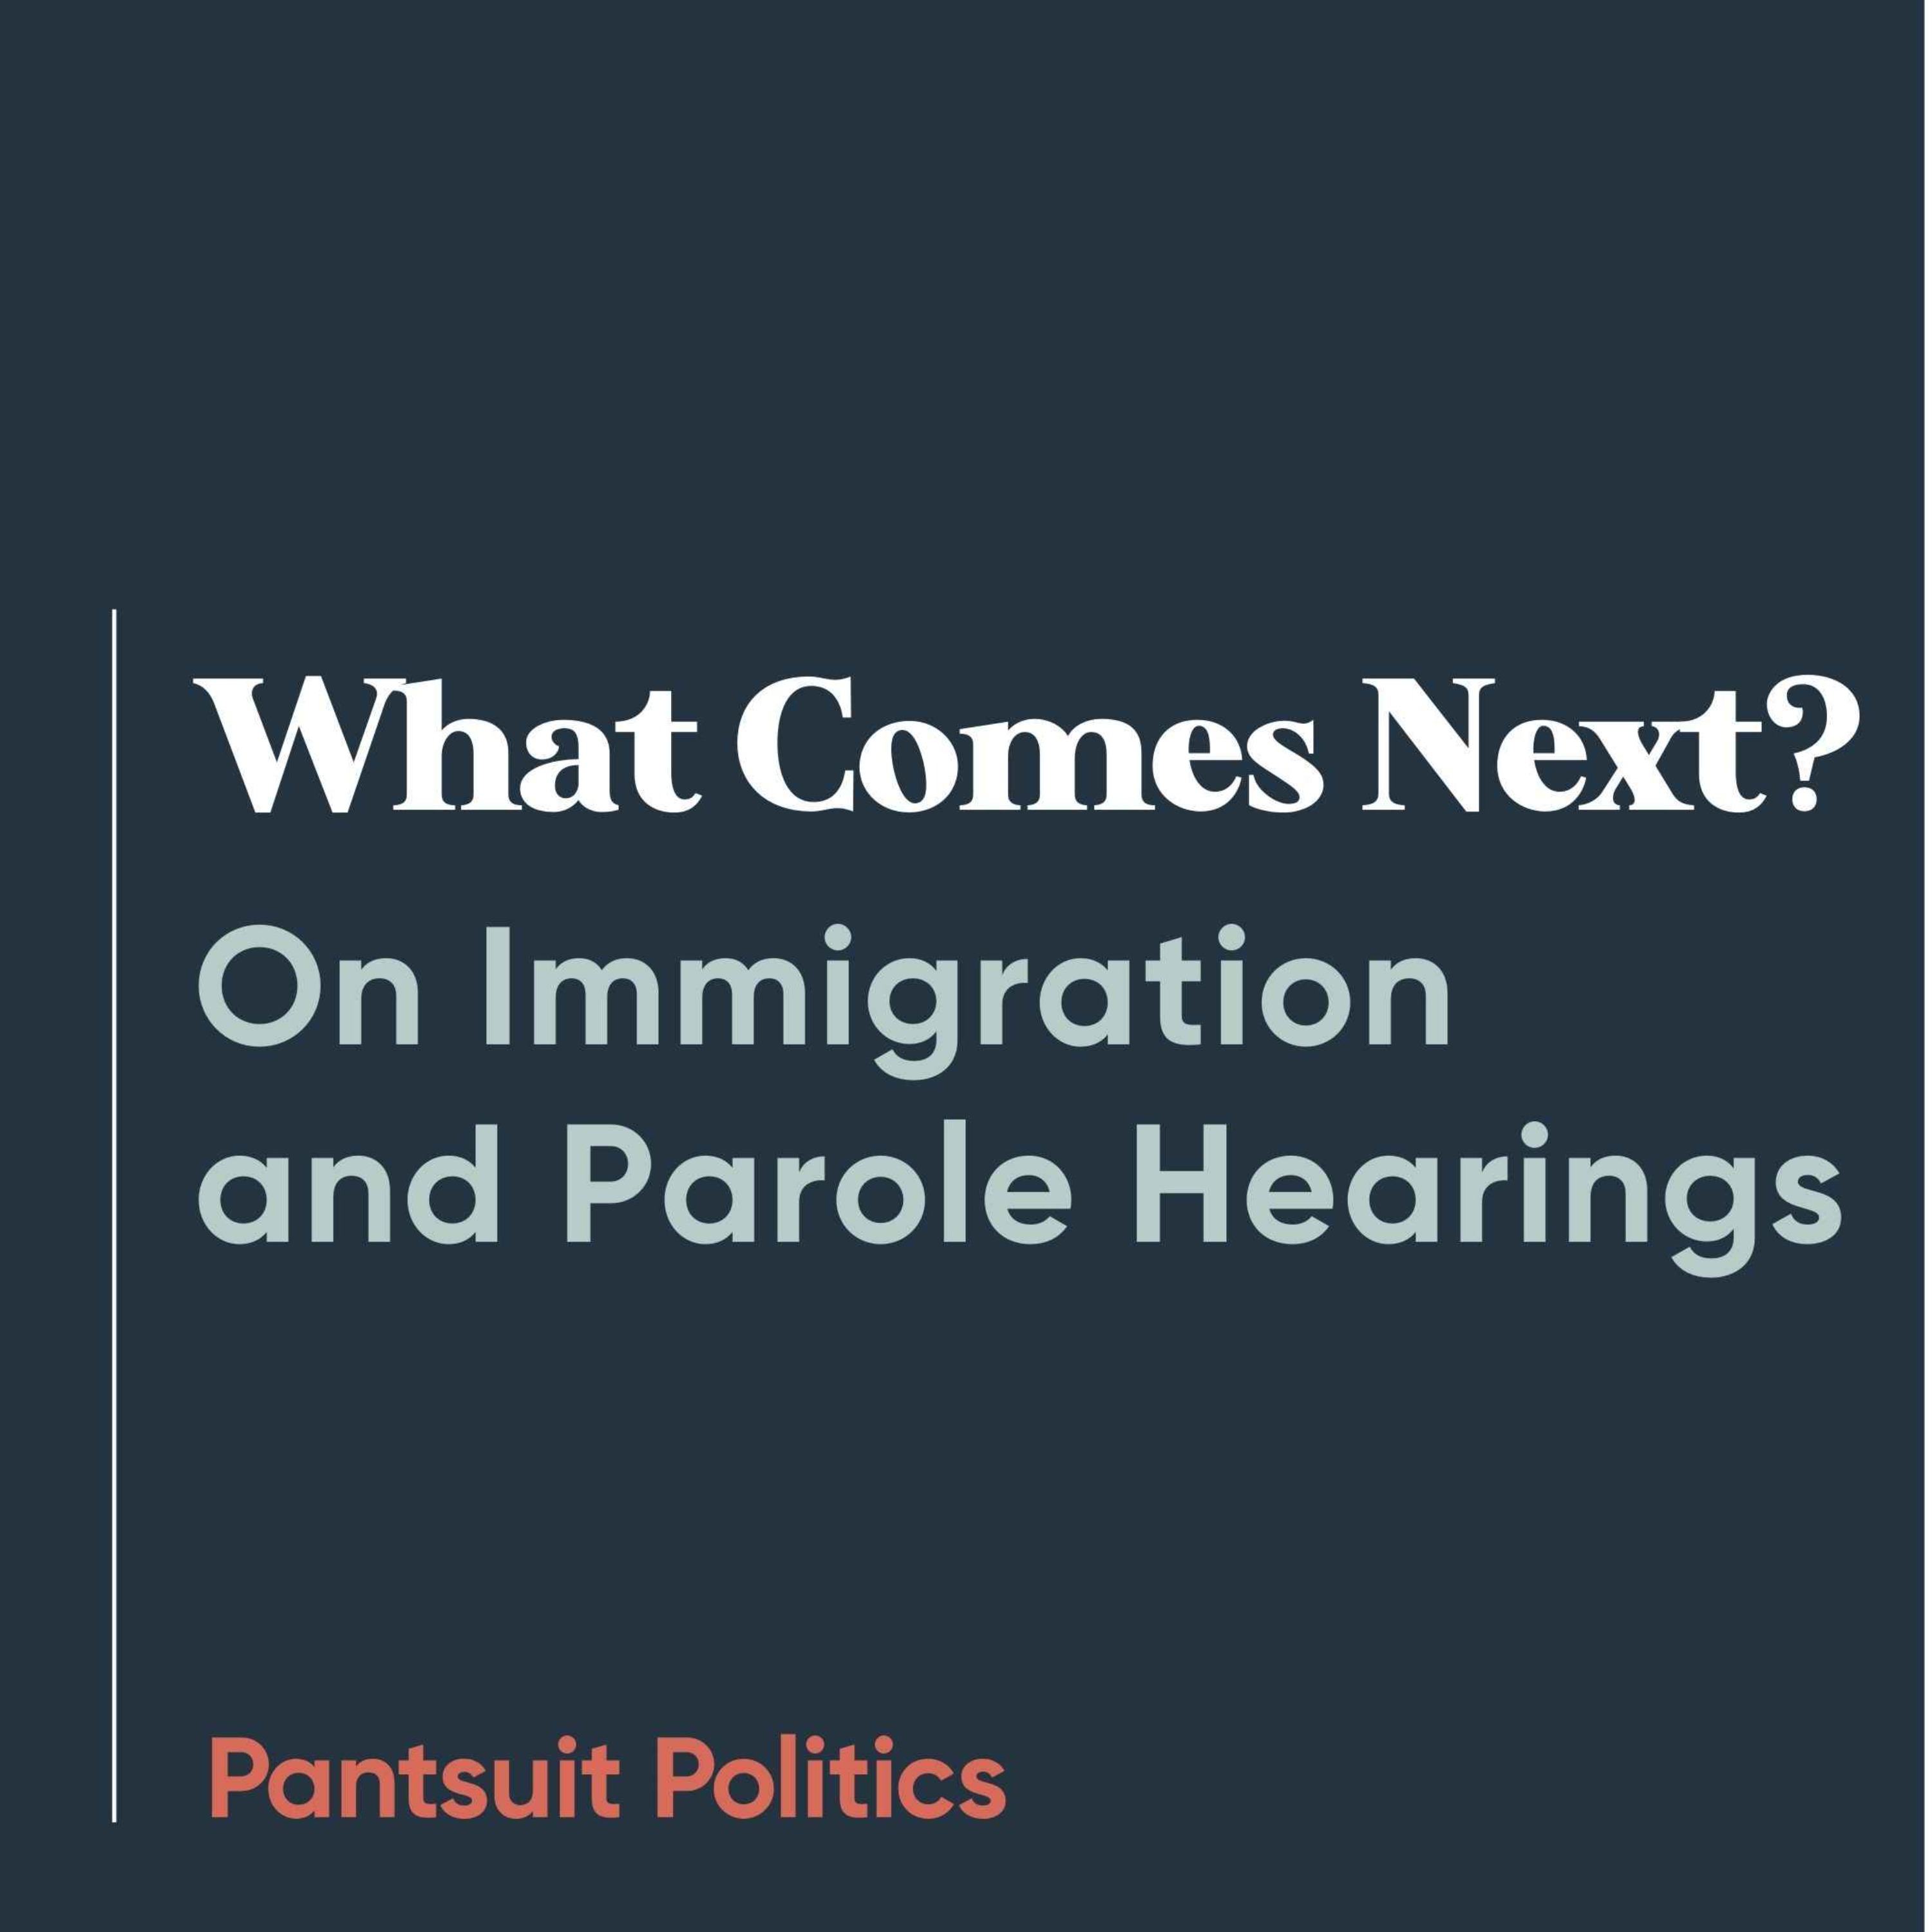 What Comes Next? On Immigration and Parole Hearings